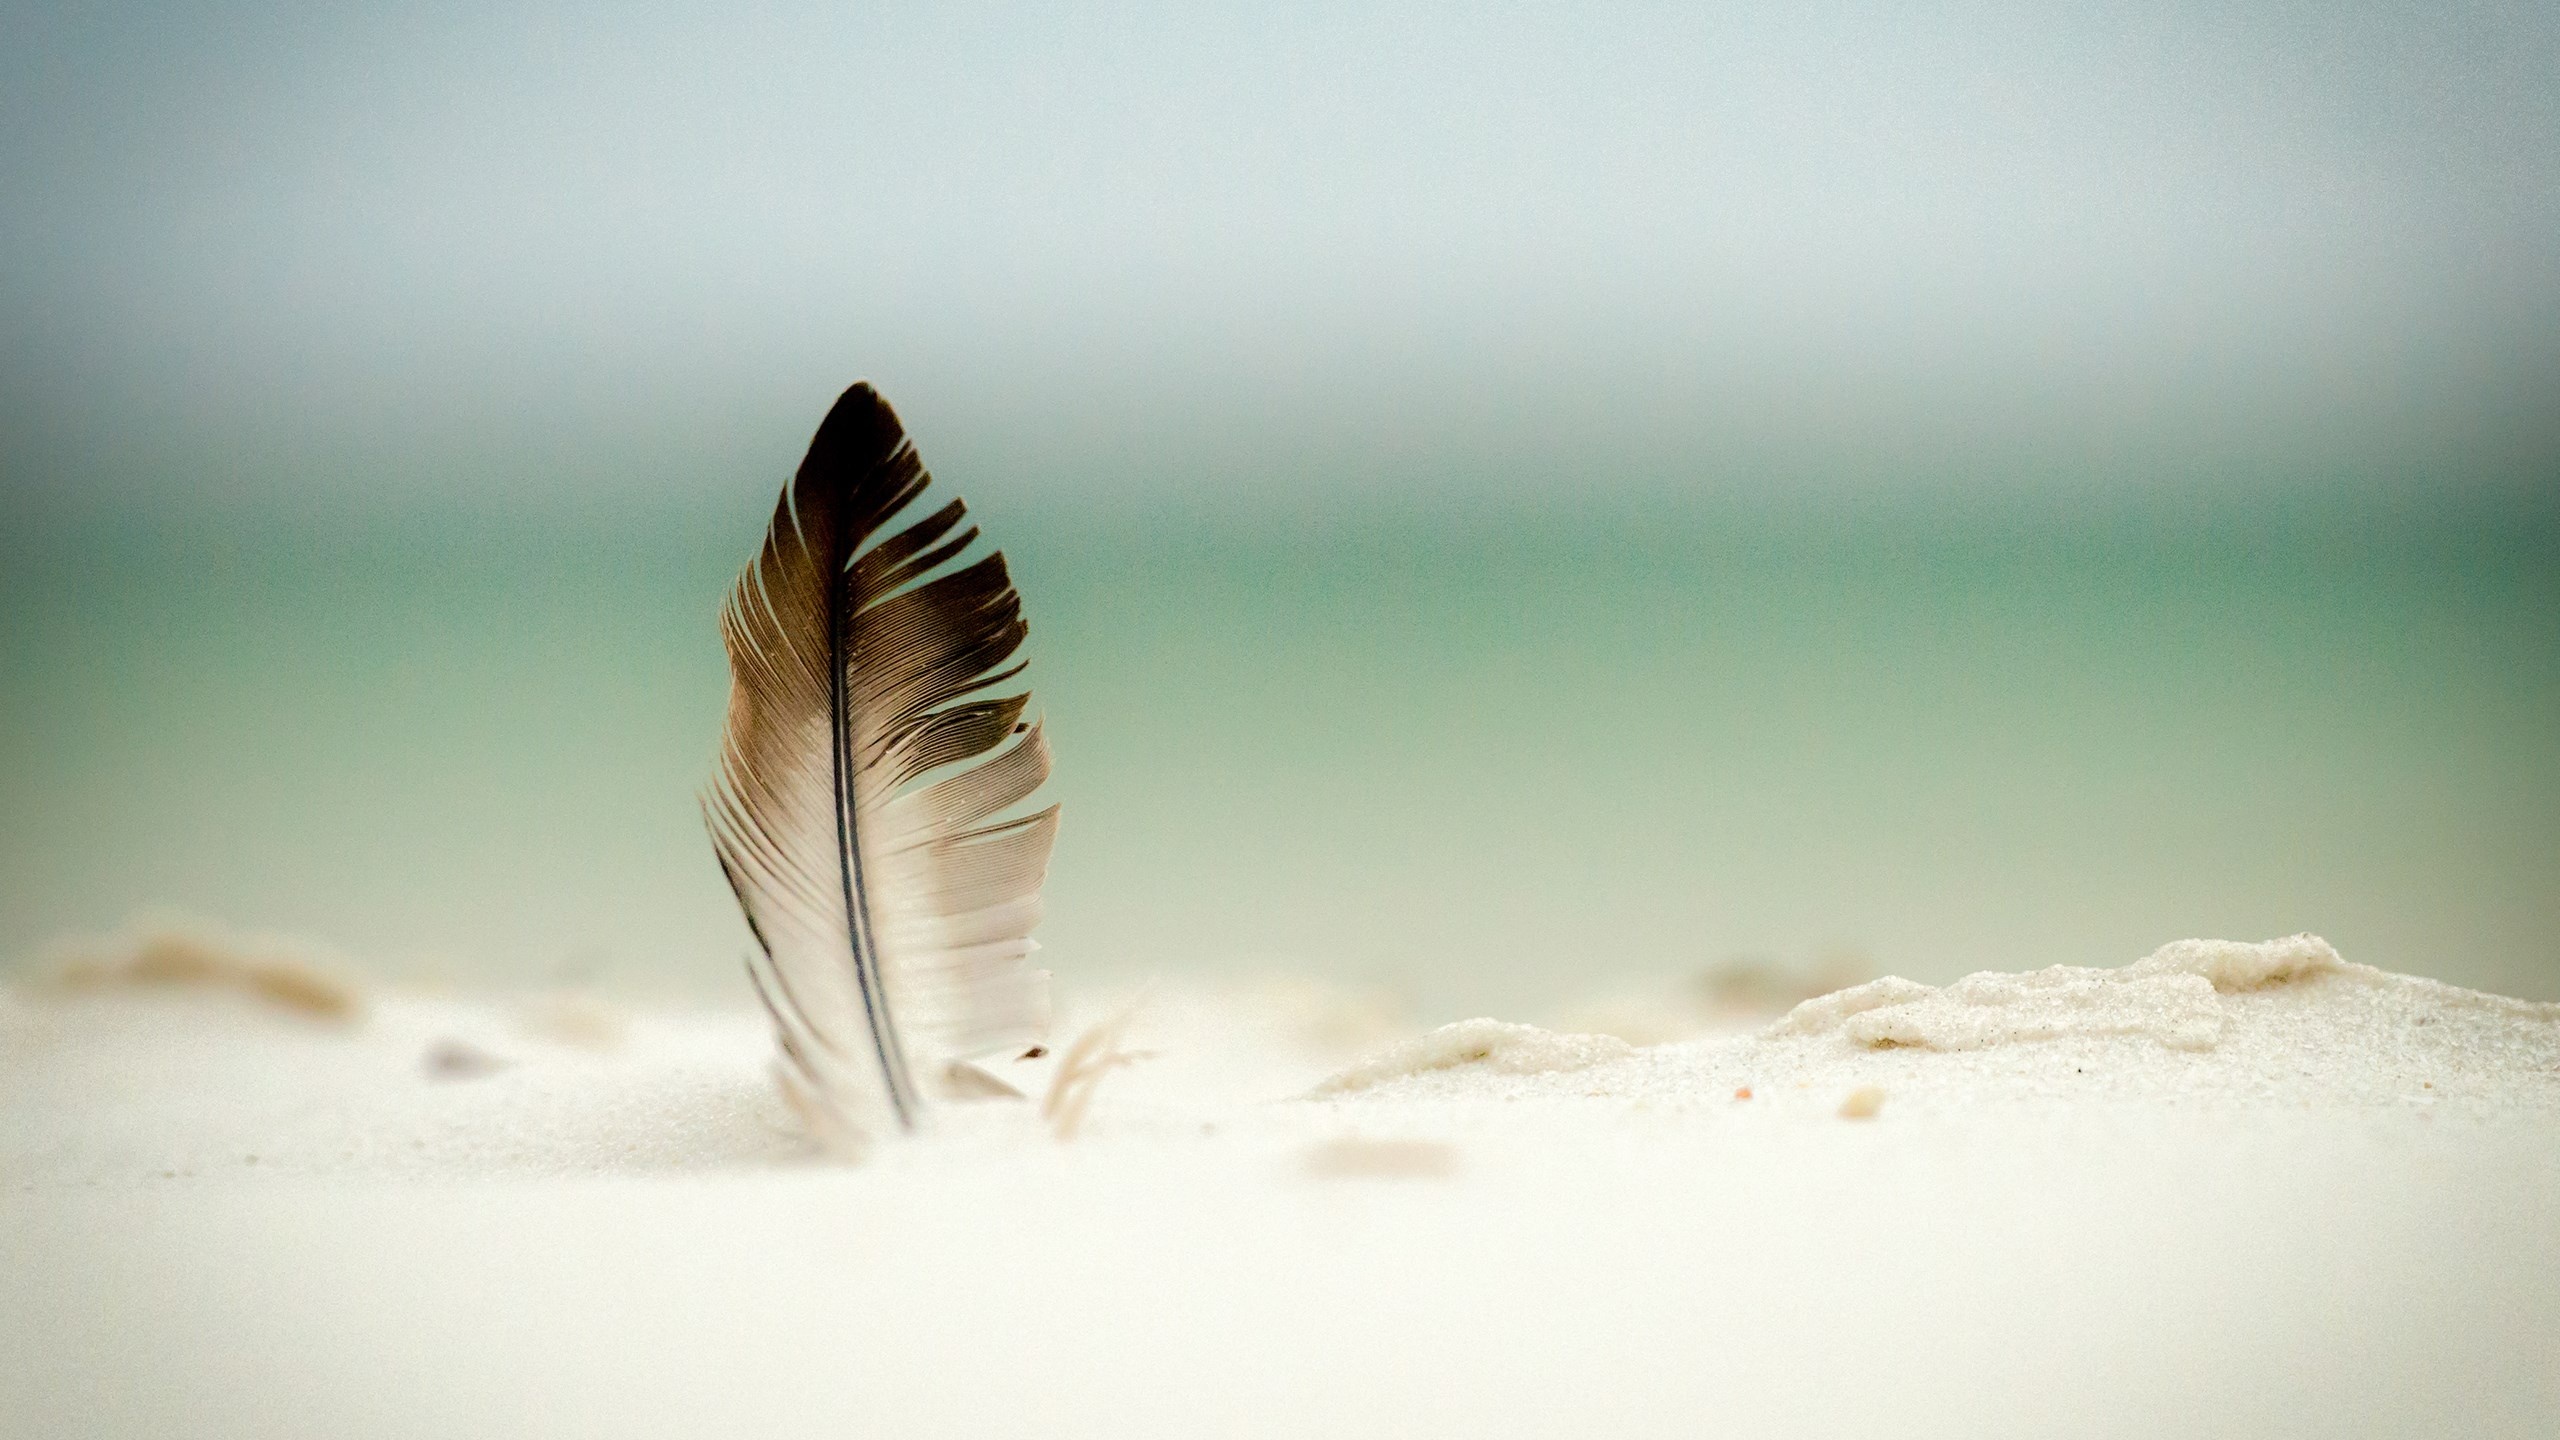 Feather: Bird's covering, The smooth, flexible, and resilient surface that supports flight and sheds water. 2560x1440 HD Background.